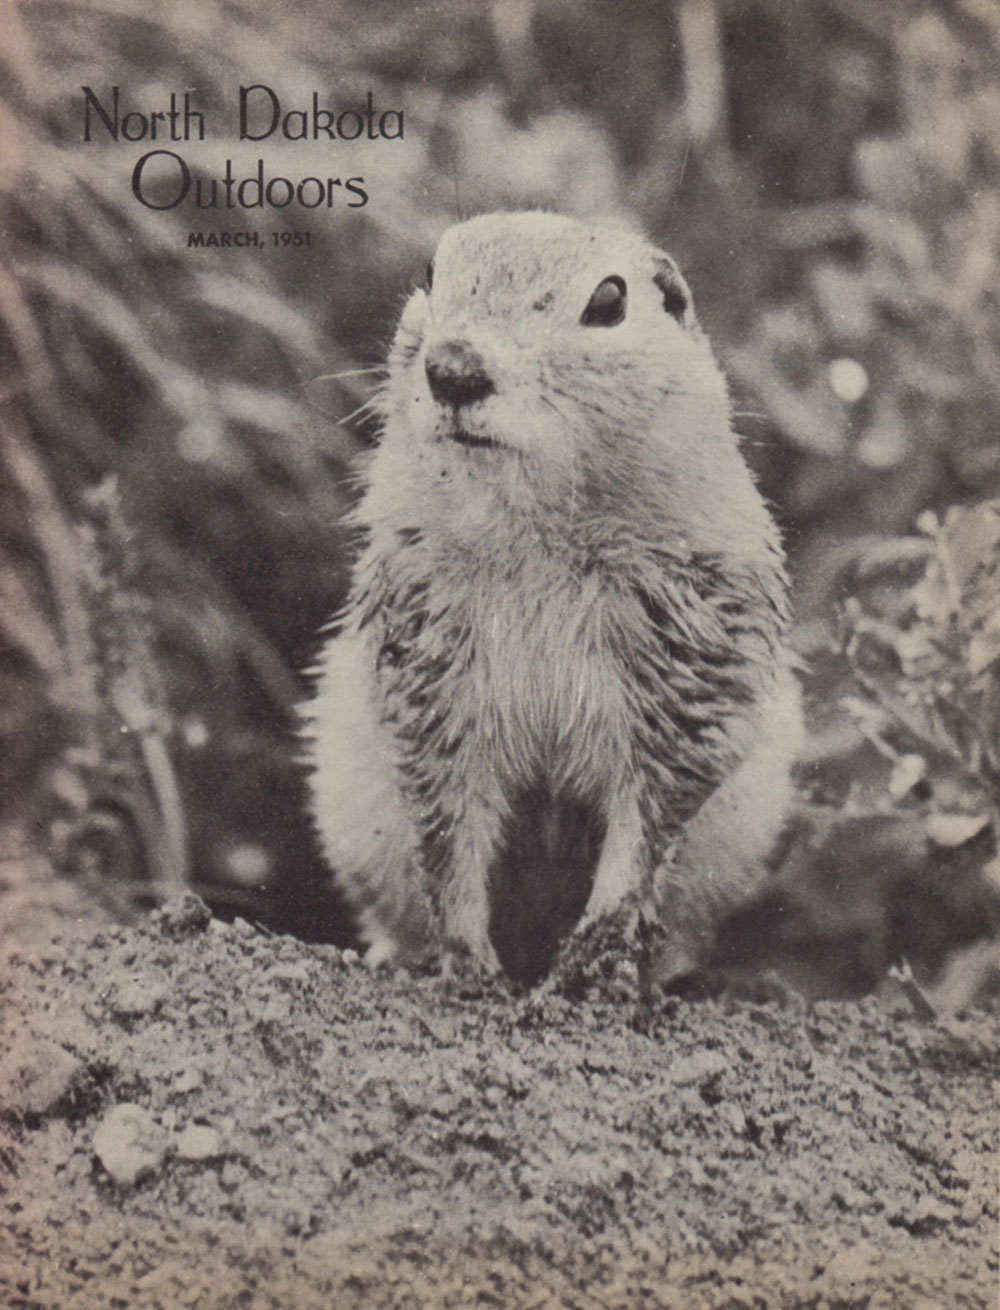 Cover of North Dakota Outdoors for the month of March 1951